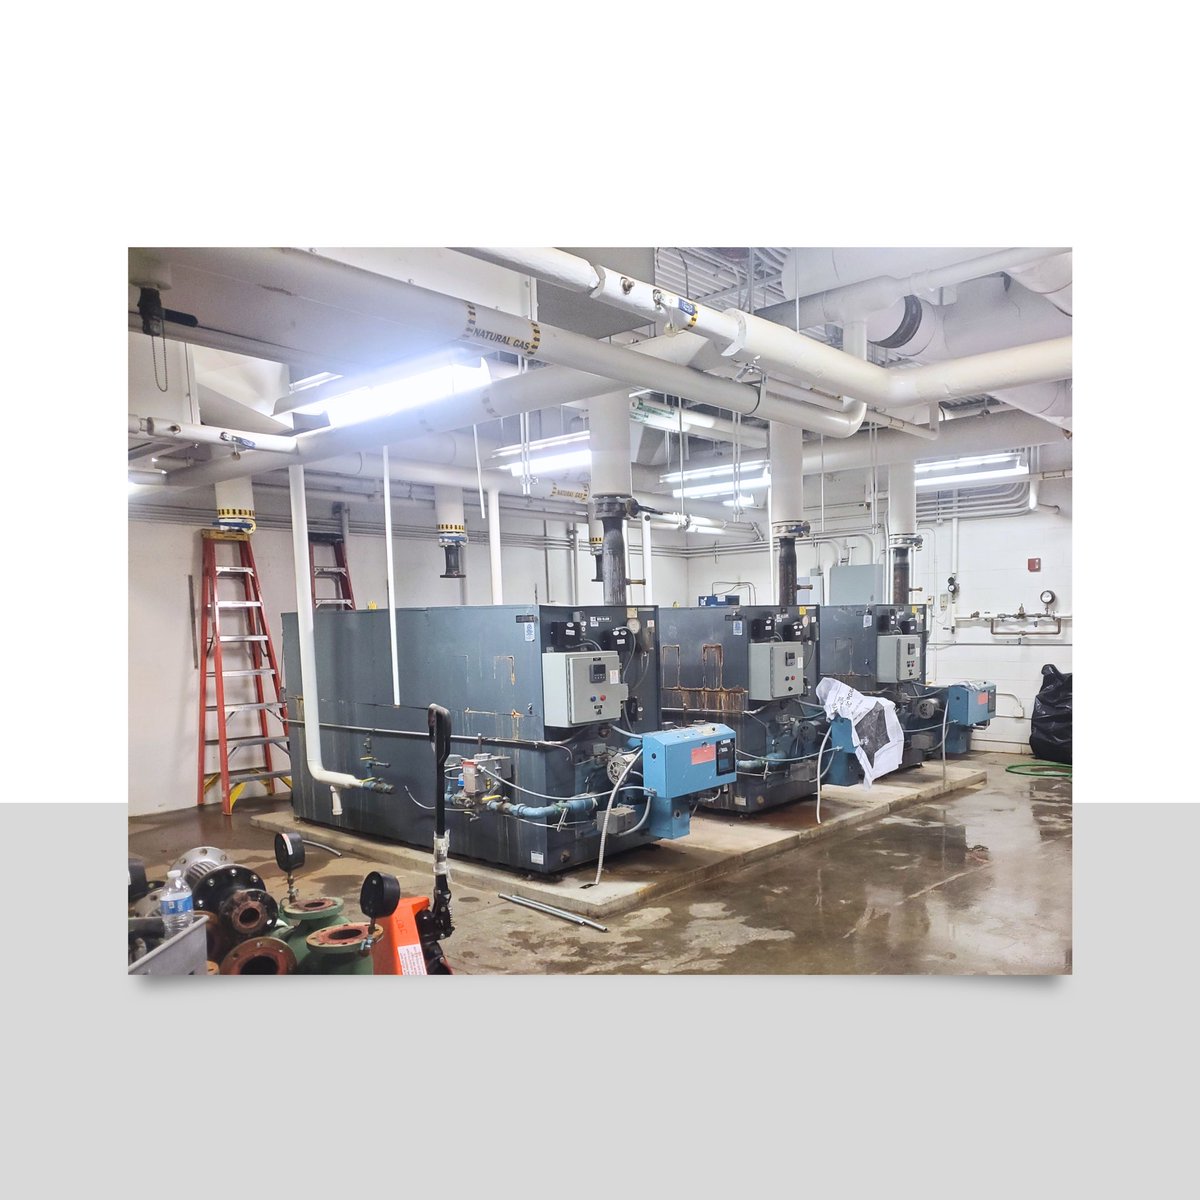 Check out this boiler change out at Skyview High School 👀

Swipe to see the old set up. Got a major facelift!

-

#FacilitiesManagement 
#CommercialHeating
#BoilerUpgrade
#HvacUpgrade 
#IndustrialHeating
#EnergyEfficiency
#BoilerInstallation